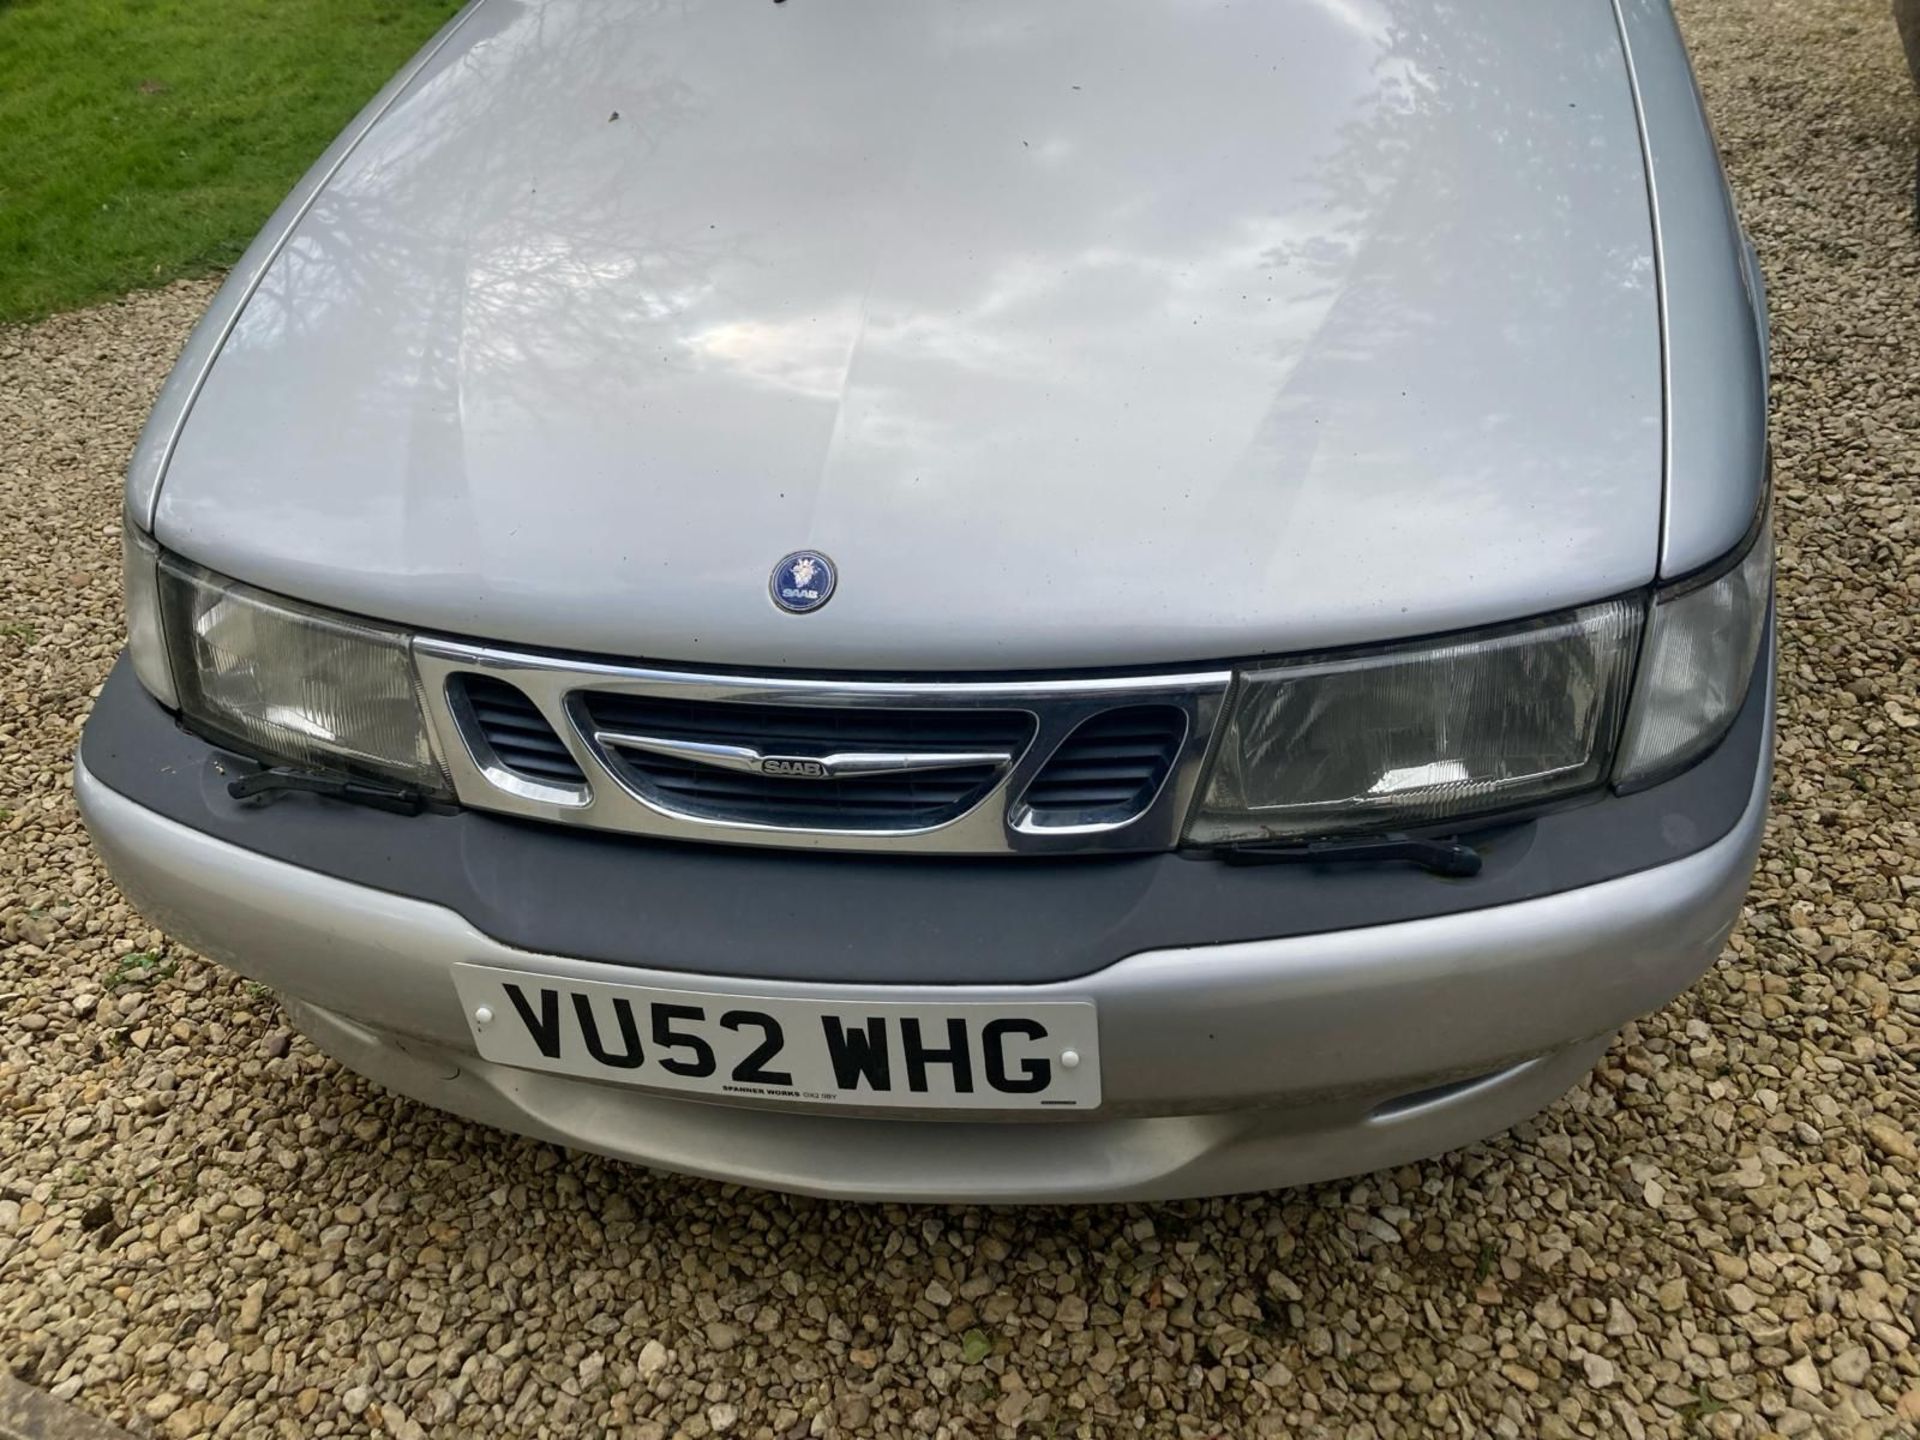 2002 Saab 9-3 Aero Convertible with 11 months MOT - Offered at No Reserve - Image 3 of 24